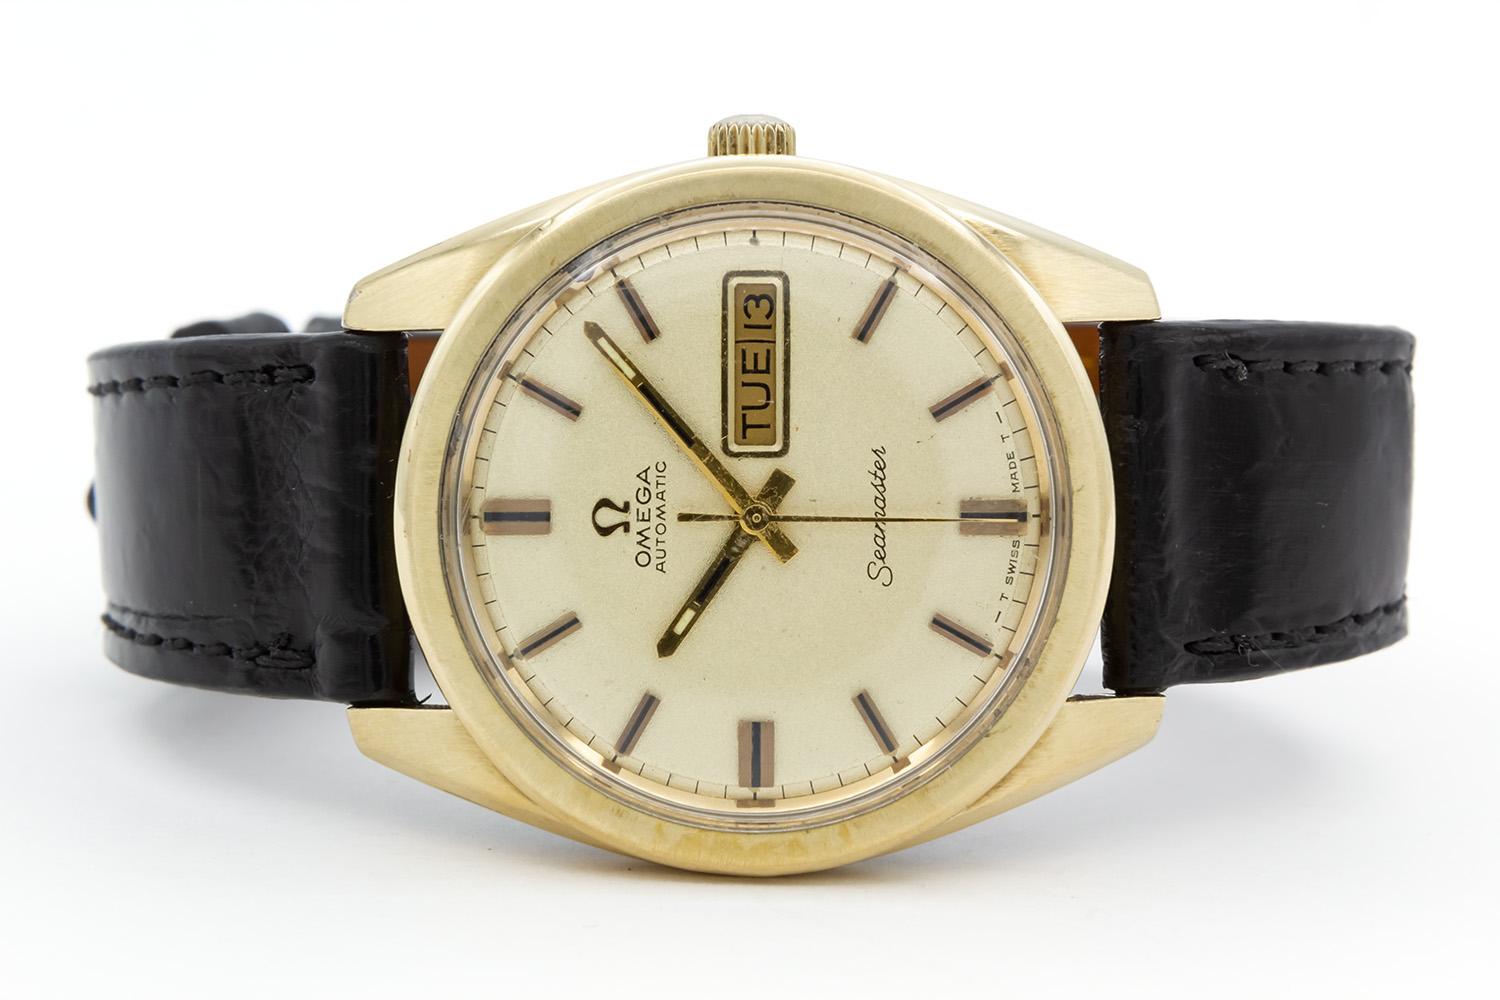 We are pleased to offer this Vintage Omega Seamaster Day Date Automatic Mens Watch. The Seamaster collection has always attracted a large and loyal following with its classic, elegant design. This vintage model features a new unworn black crocodile